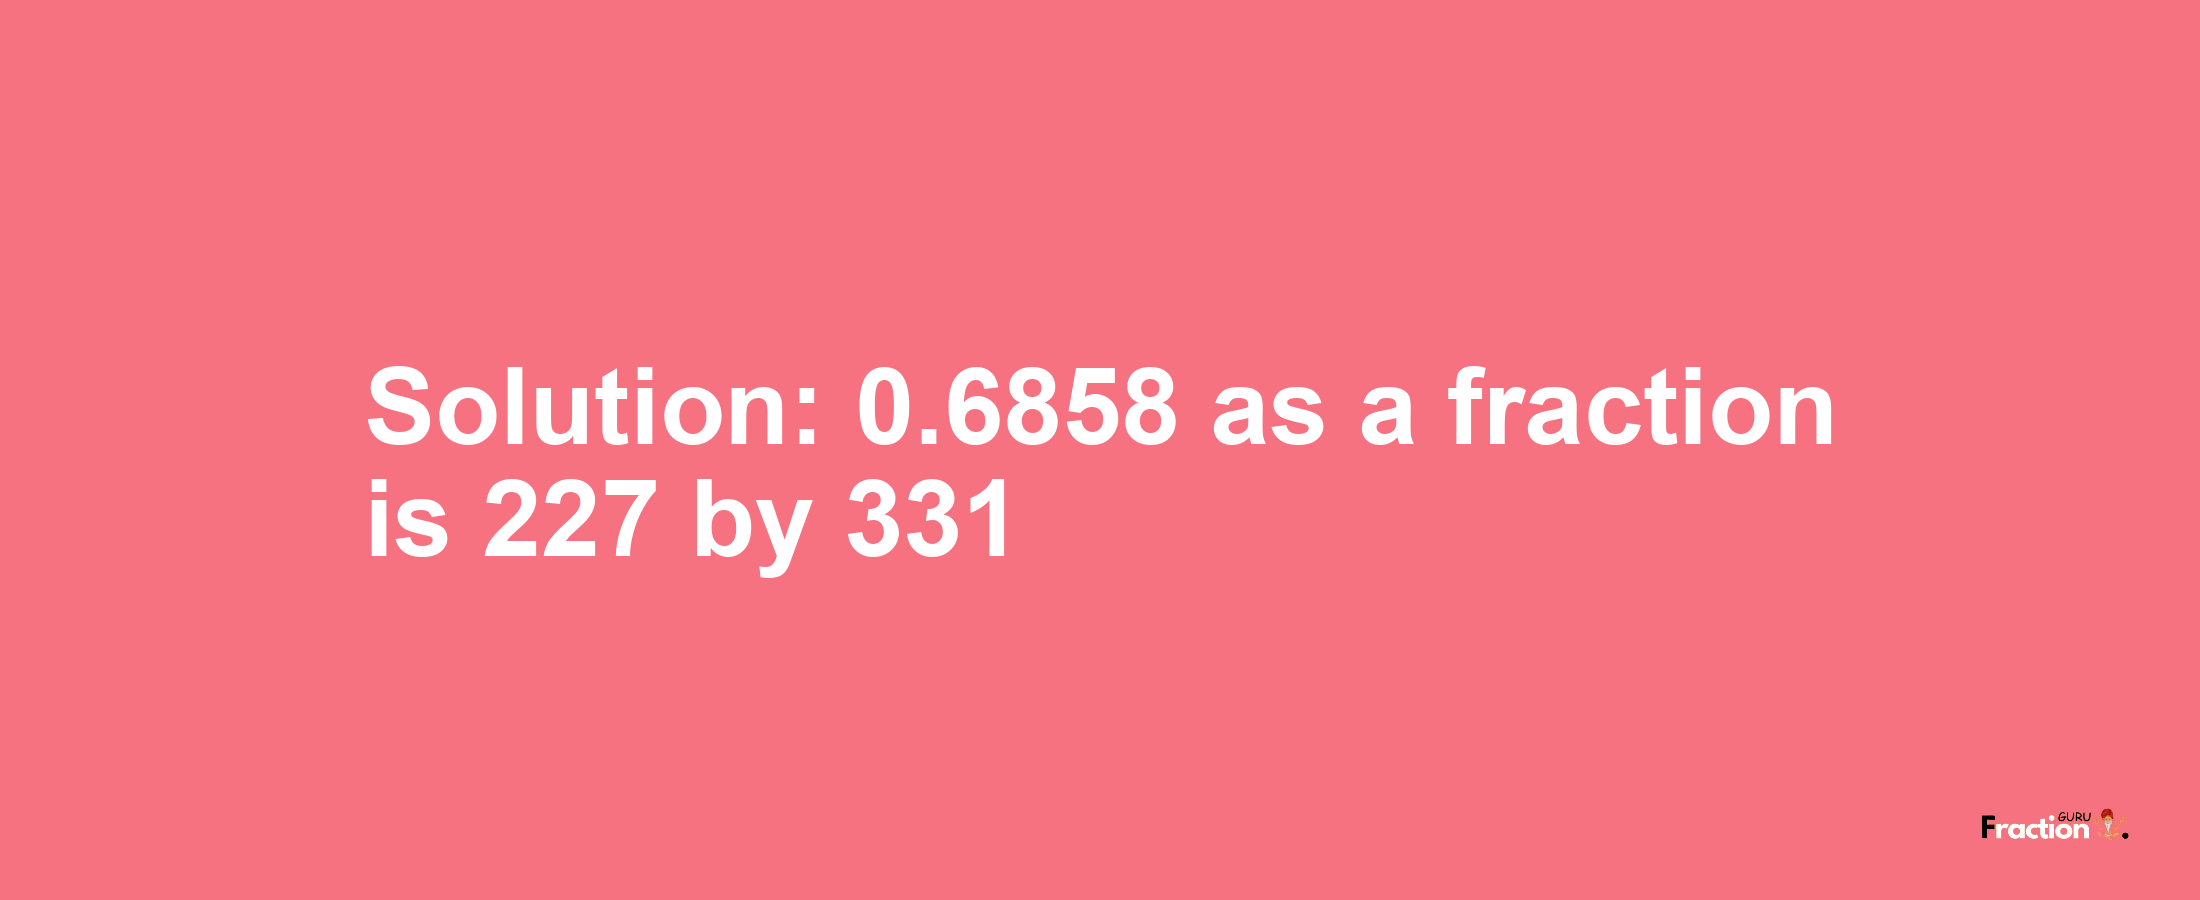 Solution:0.6858 as a fraction is 227/331